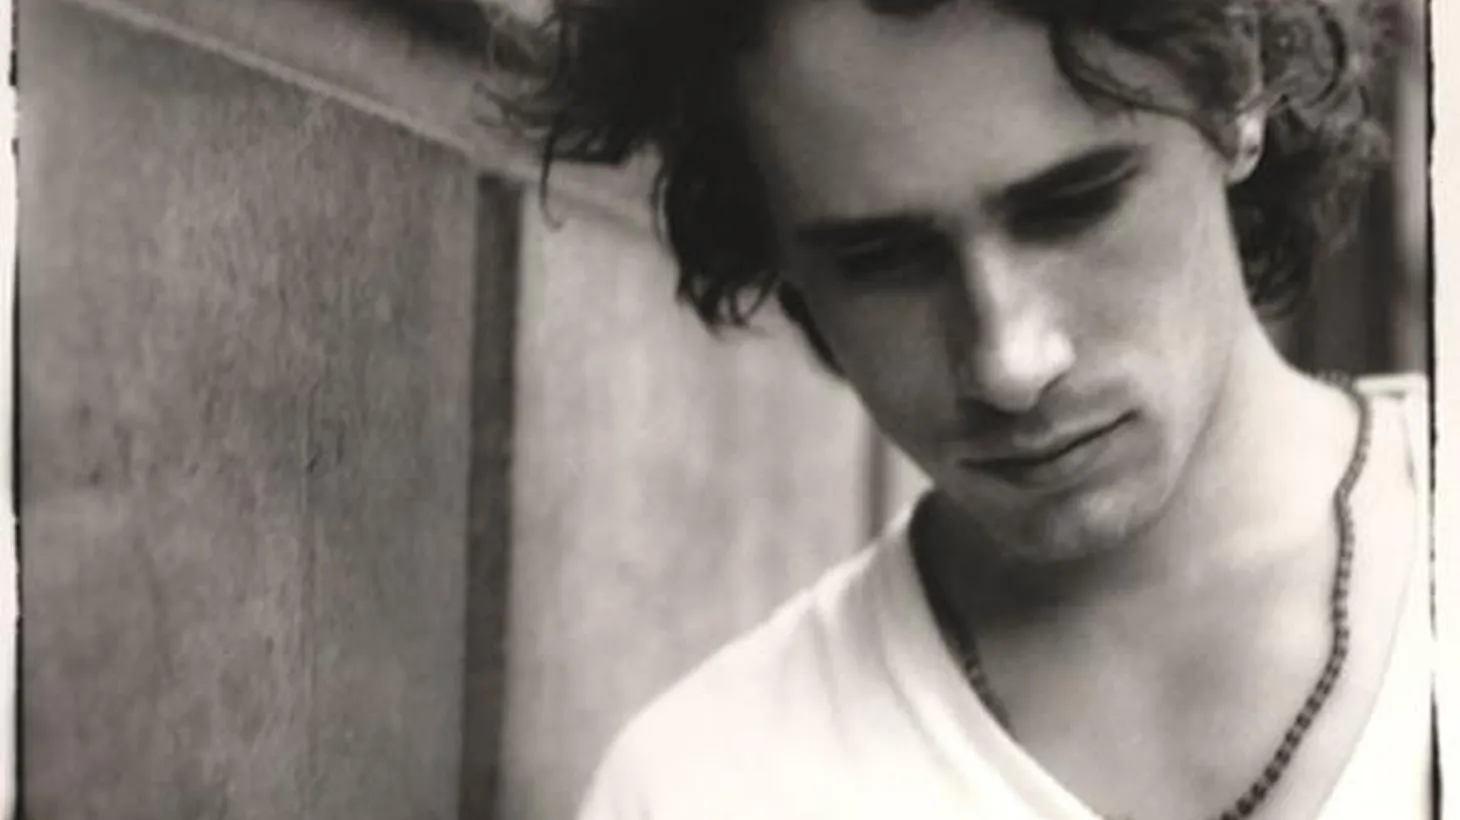 The other day, I listened to this live performance with Jeff Buckley for the first time since it originally aired on Morning Becomes Eclectic back on July 28th, 1994. It’s such a special session it’s hard to believe it almost didn’t happen.